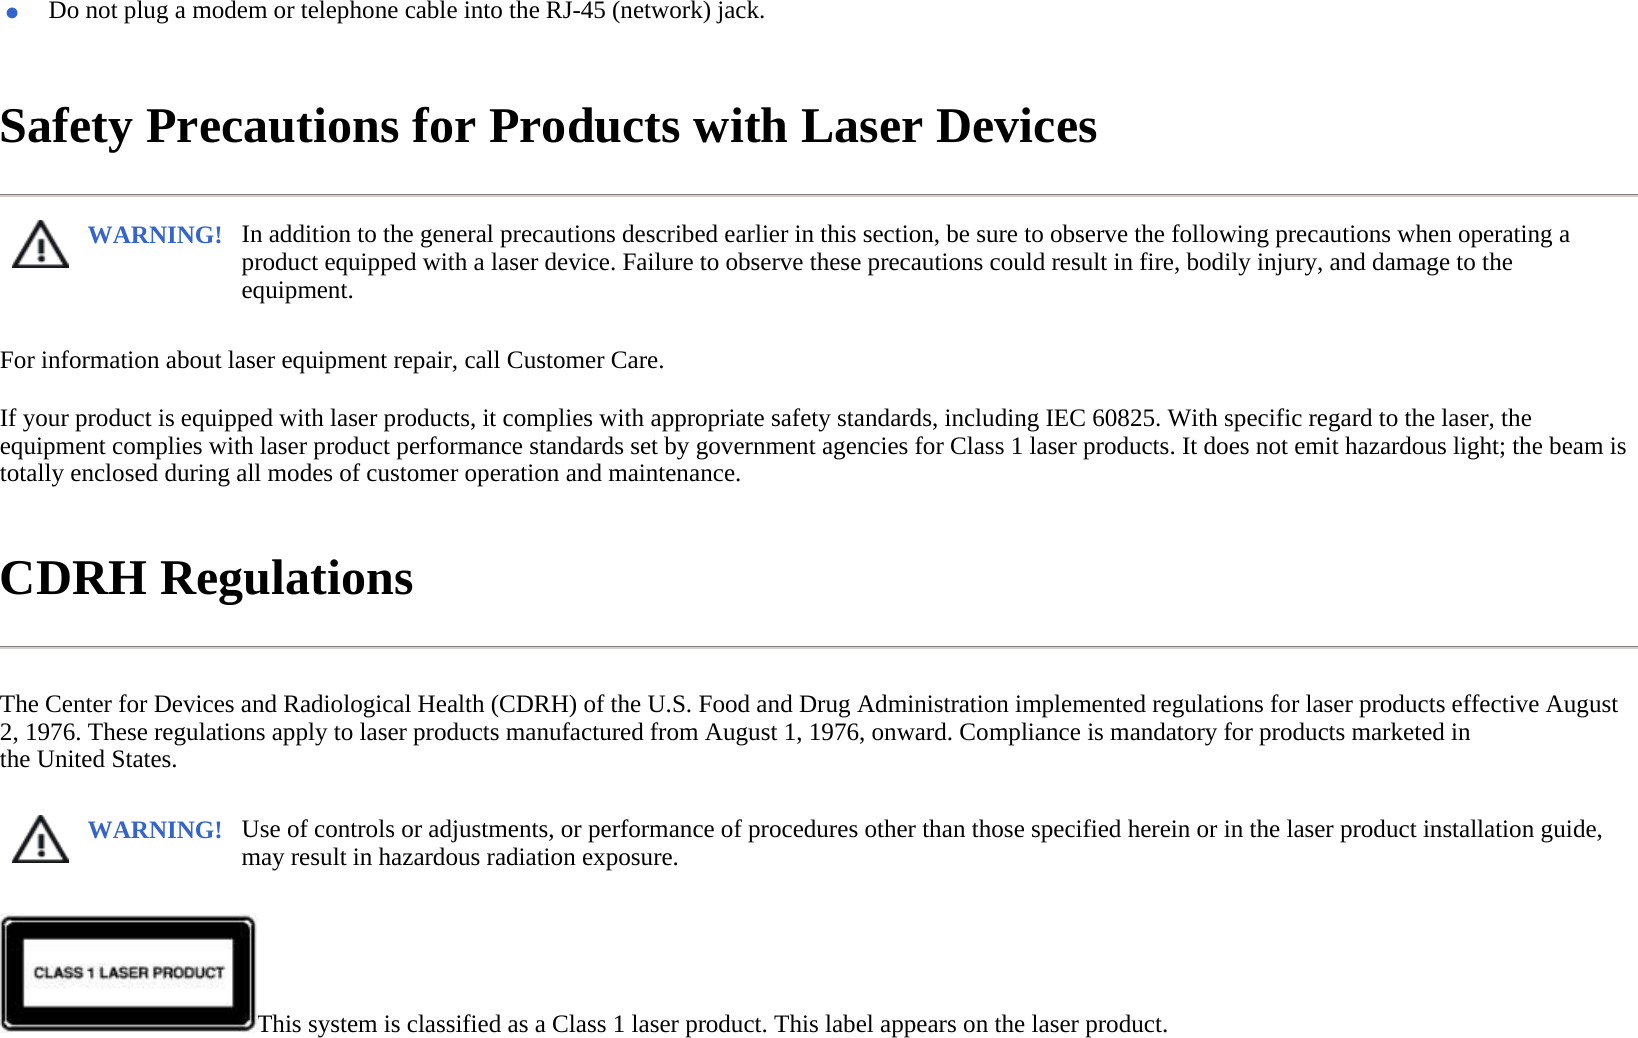 Safety Precautions for Products with Laser Devices  For information about laser equipment repair, call Customer Care.  If your product is equipped with laser products, it complies with appropriate safety standards, including IEC 60825. With specific regard to the laser, the equipment complies with laser product performance standards set by government agencies for Class 1 laser products. It does not emit hazardous light; the beam is totally enclosed during all modes of customer operation and maintenance.  CDRH Regulations  The Center for Devices and Radiological Health (CDRH) of the U.S. Food and Drug Administration implemented regulations for laser products effective August 2, 1976. These regulations apply to laser products manufactured from August 1, 1976, onward. Compliance is mandatory for products marketed in the United States.  This system is classified as a Class 1 laser product. This label appears on the laser product.  ●Do not plug a modem or telephone cable into the RJ-45 (network) jack.WARNING! In addition to the general precautions described earlier in this section, be sure to observe the following precautions when operating a product equipped with a laser device. Failure to observe these precautions could result in fire, bodily injury, and damage to the equipment.  WARNING! Use of controls or adjustments, or performance of procedures other than those specified herein or in the laser product installation guide, may result in hazardous radiation exposure.  